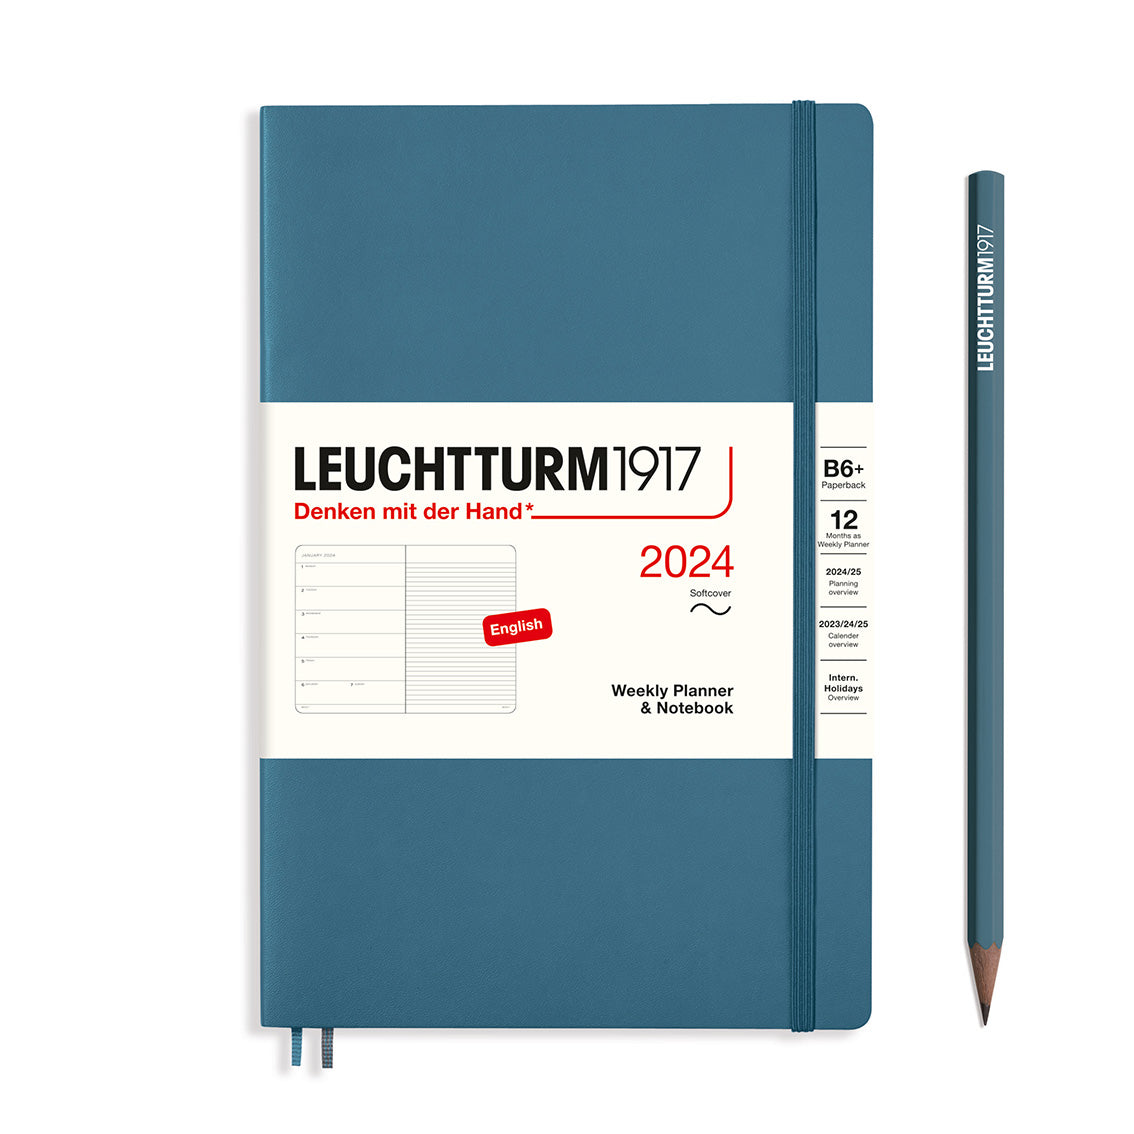 An image of a blue planner with a blue elastic band holding it together and a cream paper wrap around the middle stating the business name Leuchtturm1917, that it is for the year 2024, it is a weekly planner and notebook, is B6+ in size and an English language version. It has an image on the wrap showing the inside layout which is a week on the left hand page and a notes page on thr right hand page. A blue pencil is shown at the side of the planner.